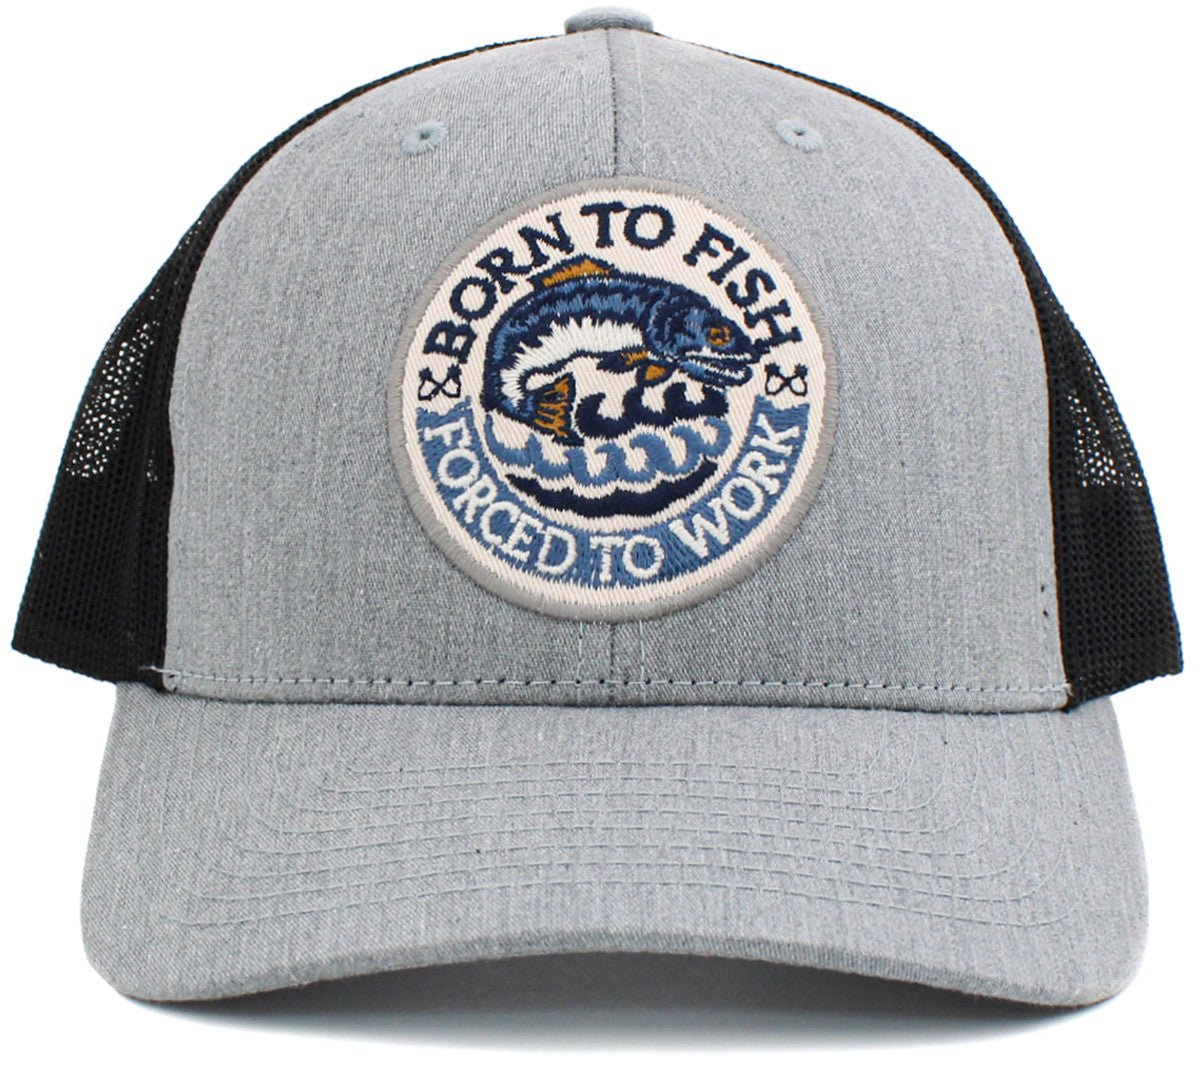 Born to Fish Forced to Work Trucker Hat